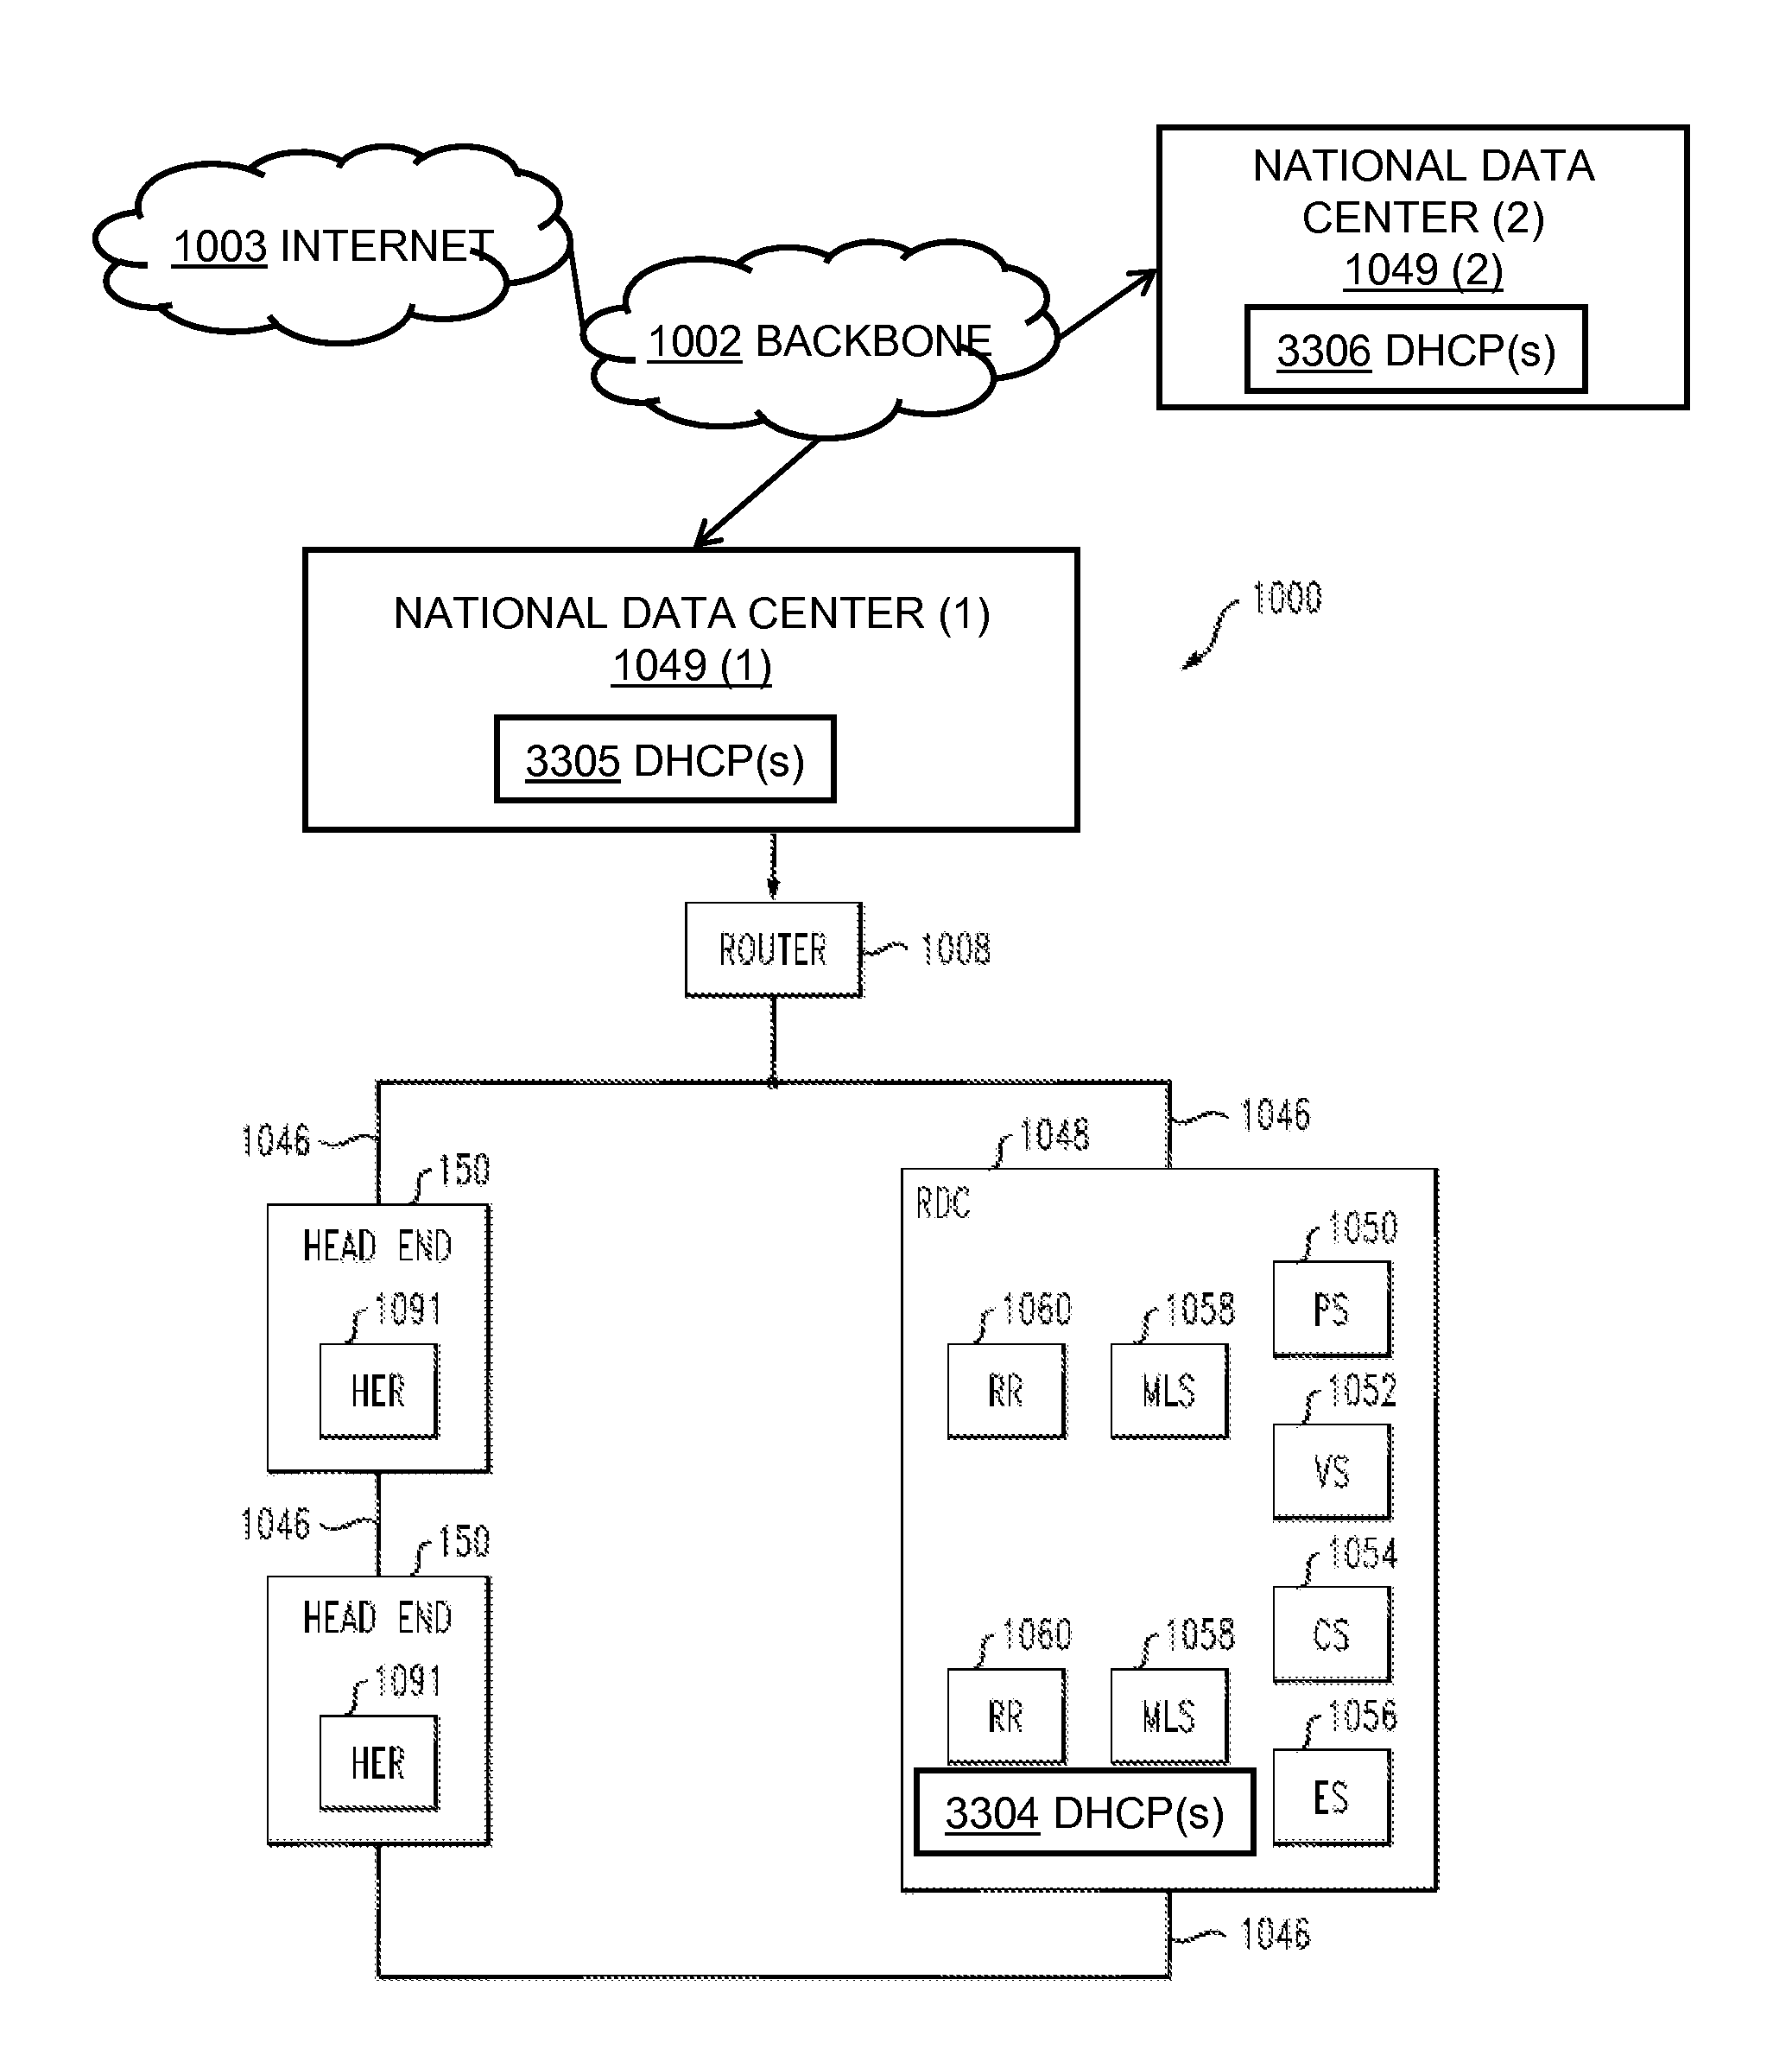 System and method for automatic routing of dynamic host configuration protocol (DHCP) traffic